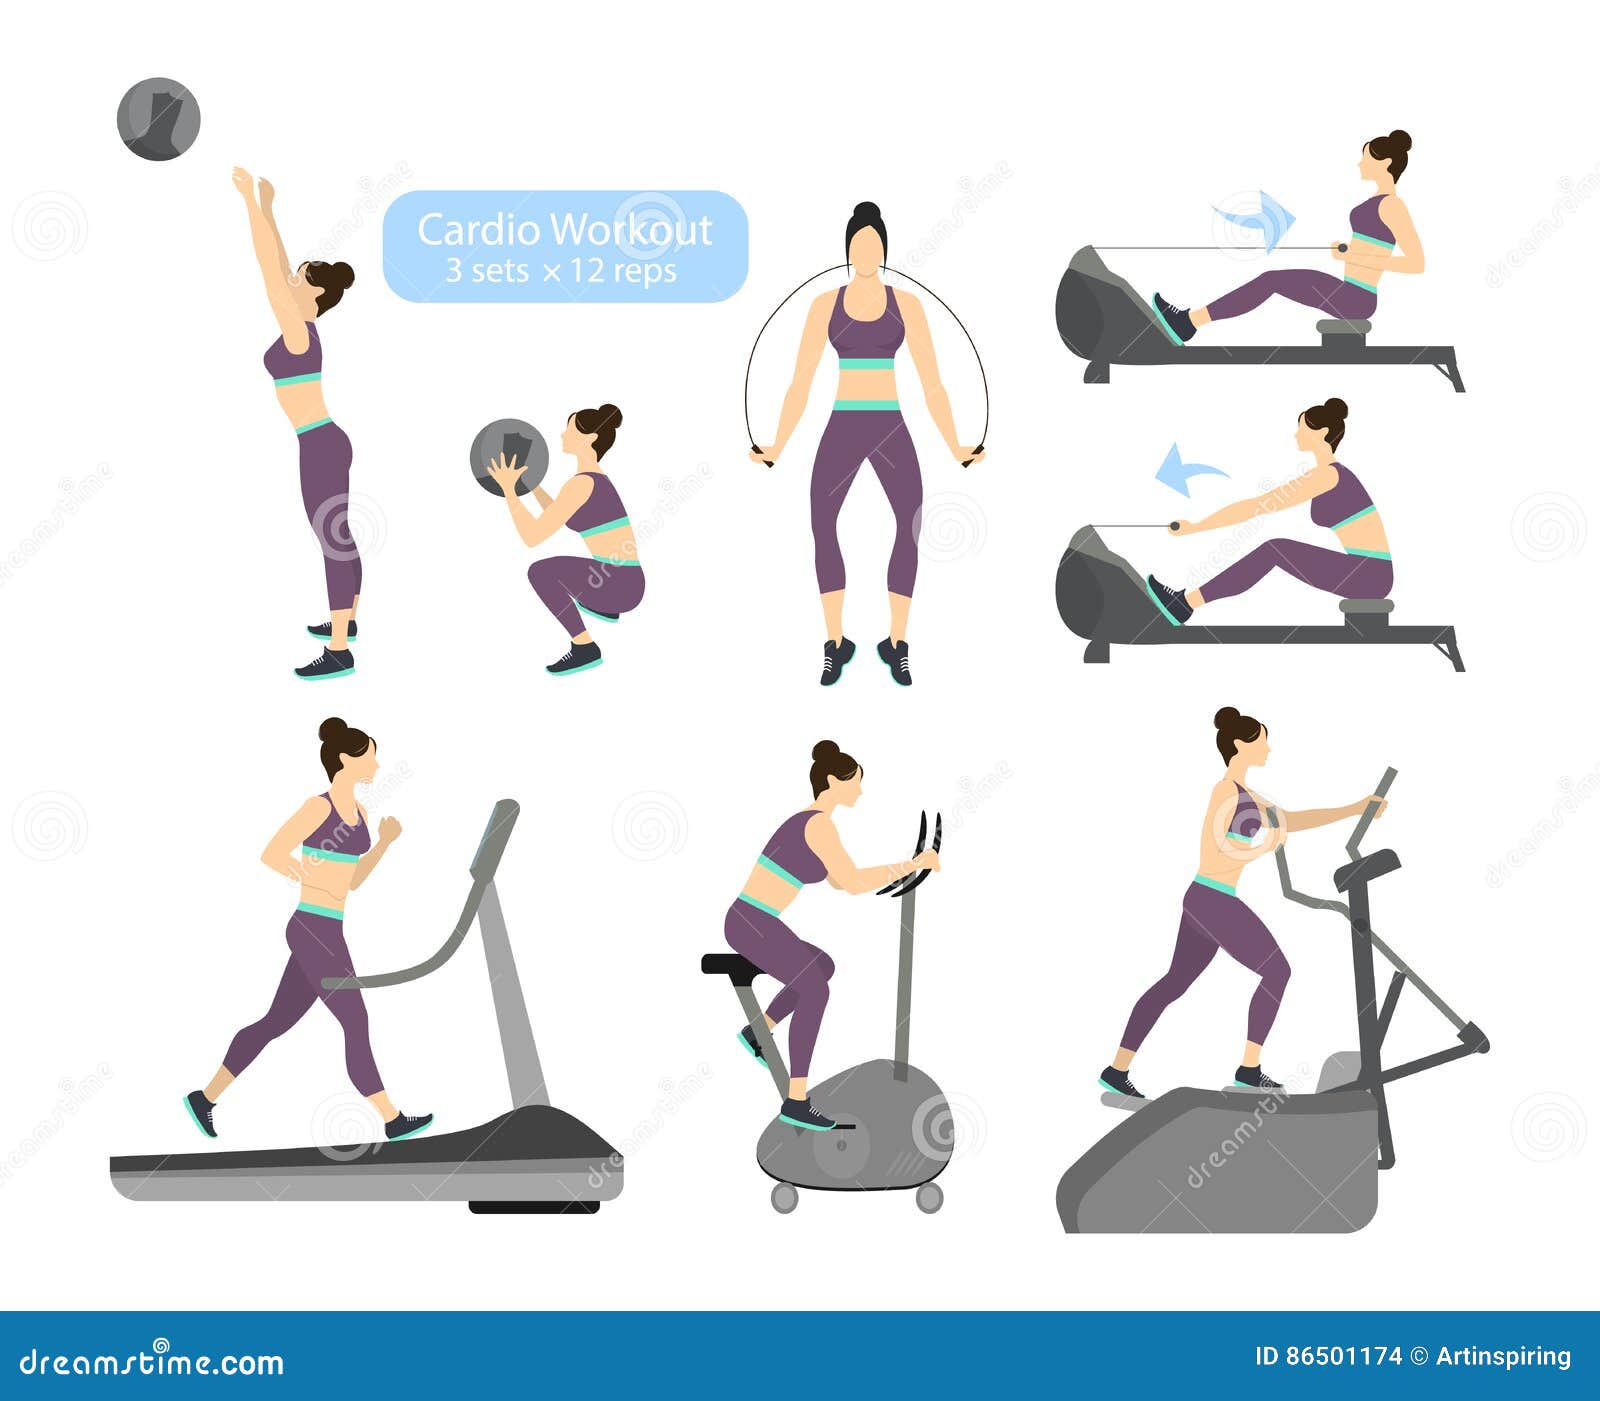 Types of Cardio exercises and 5 health benefits of cardio workout with tips  - Medkart Pharmacy Blogs